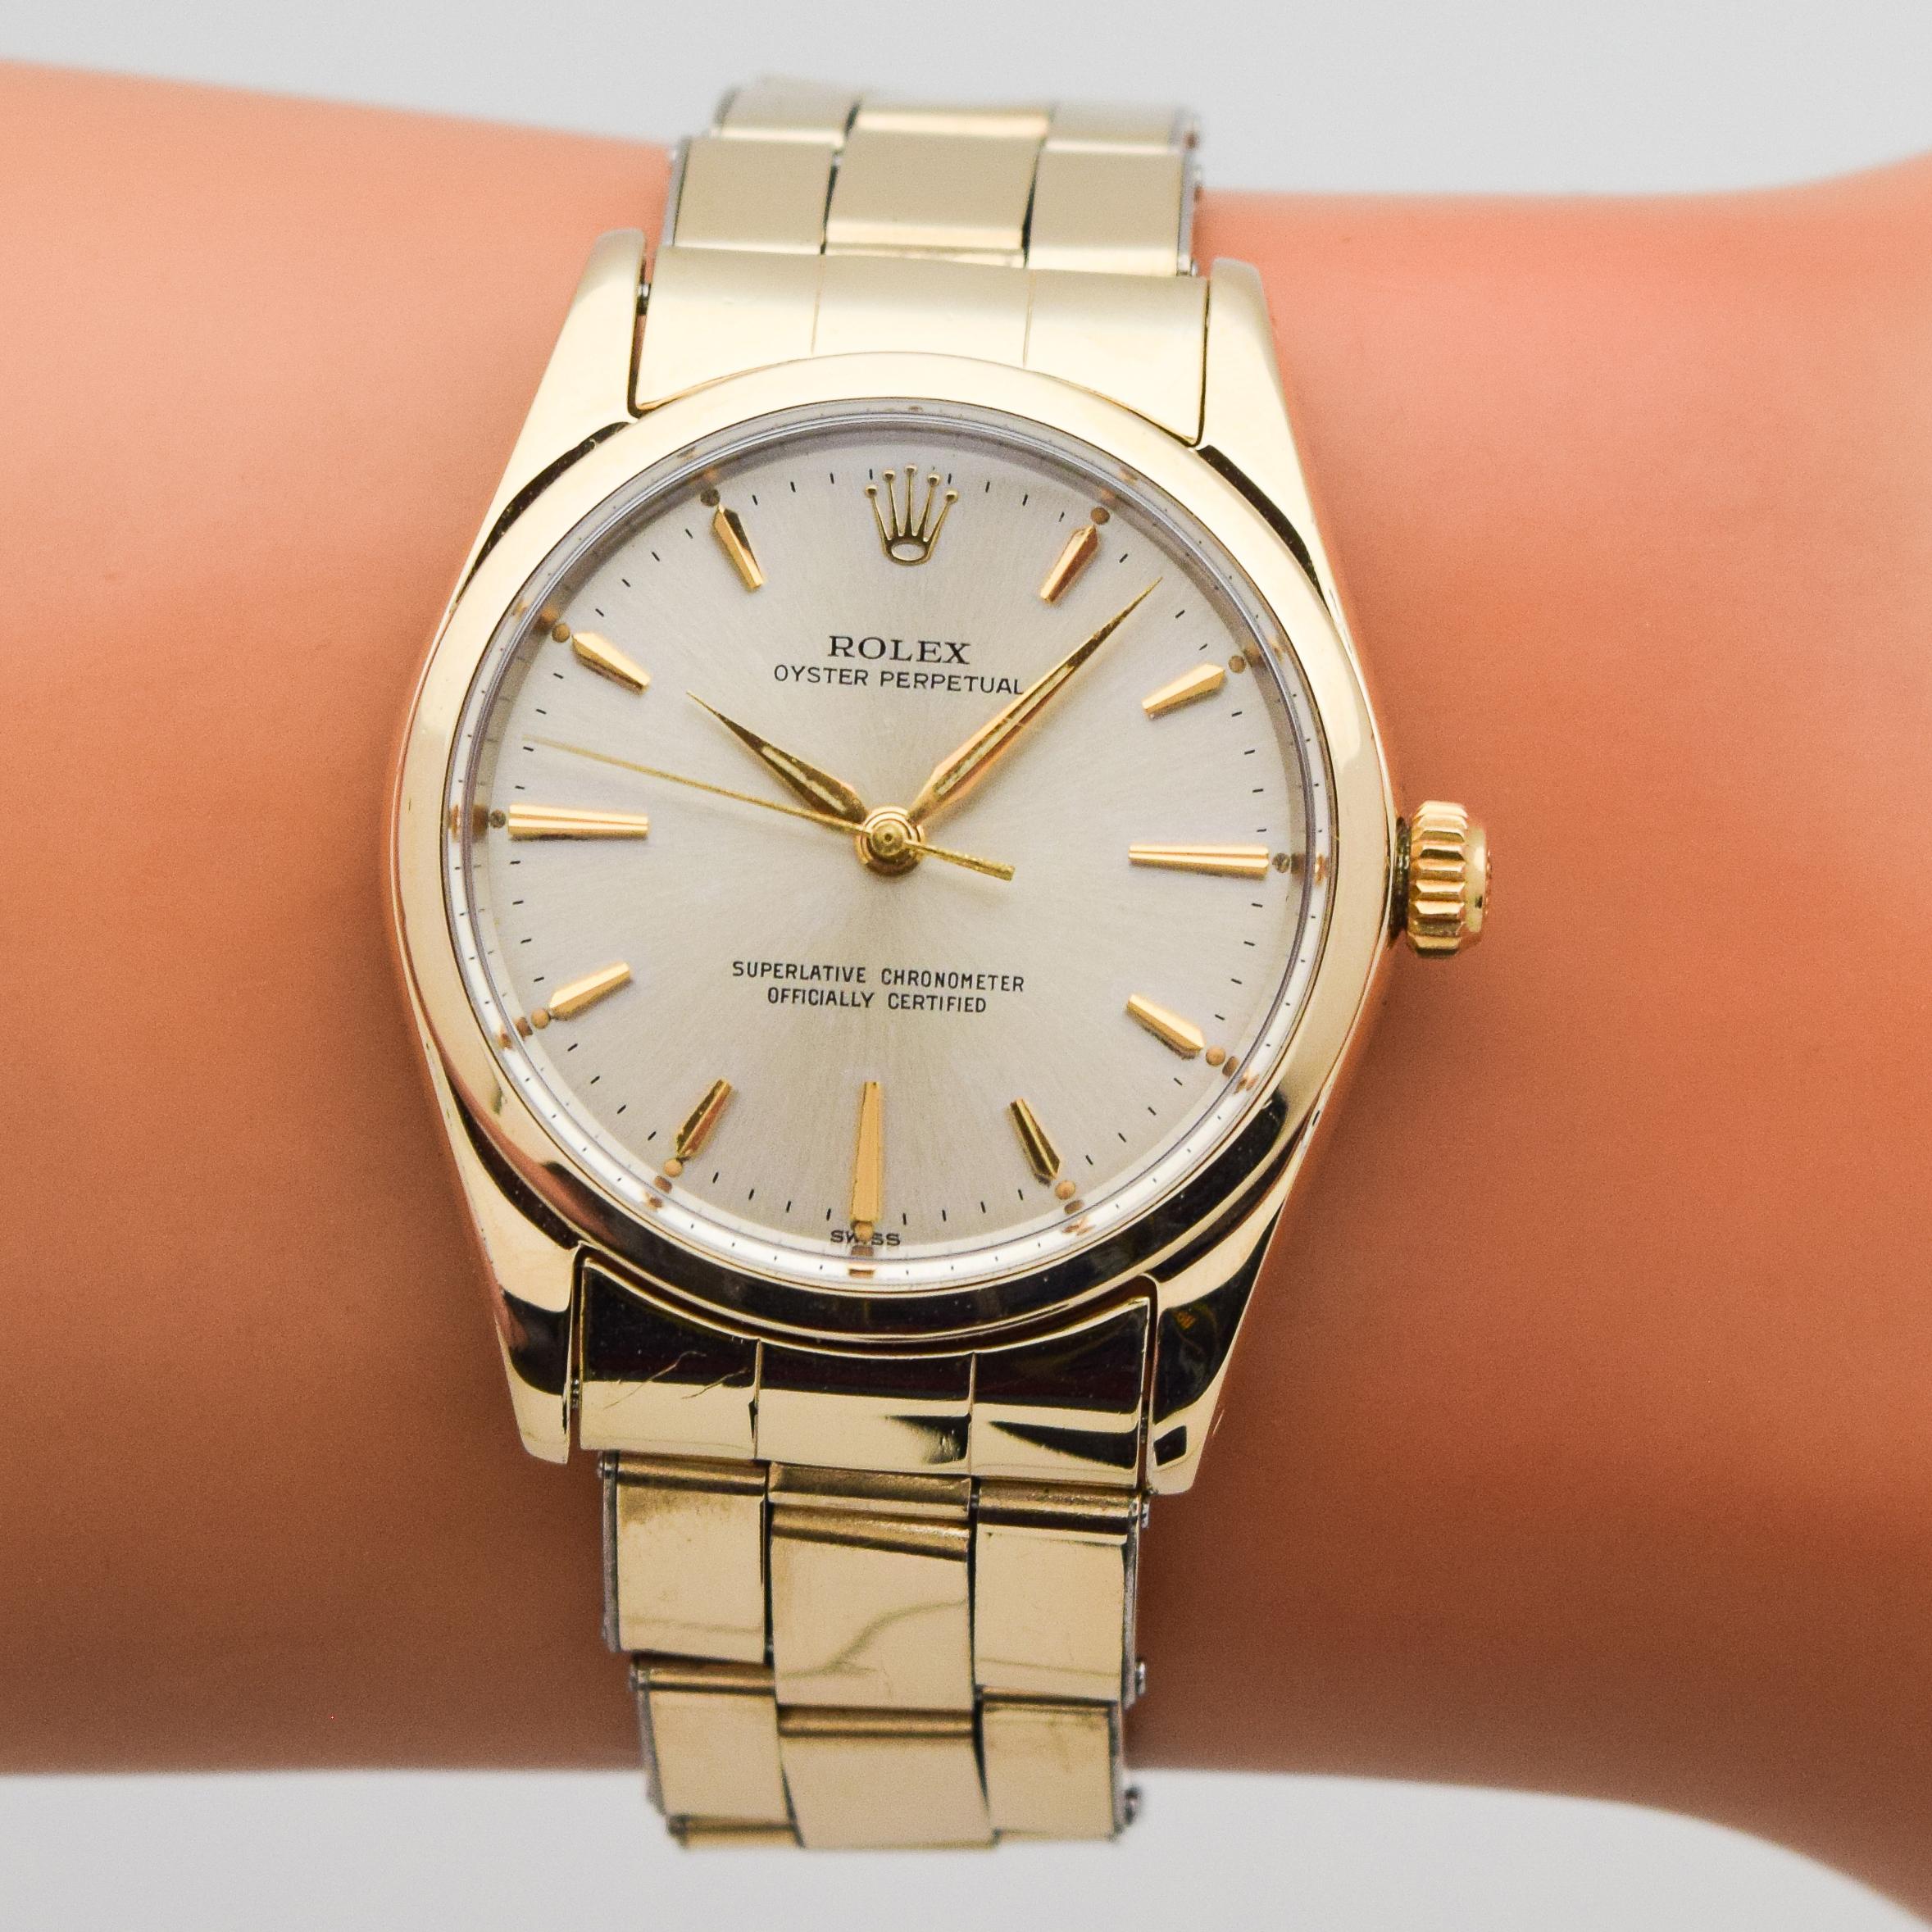 Vintage Rolex Oyster Perpetual Ref. 1014 Watch, 1956 1